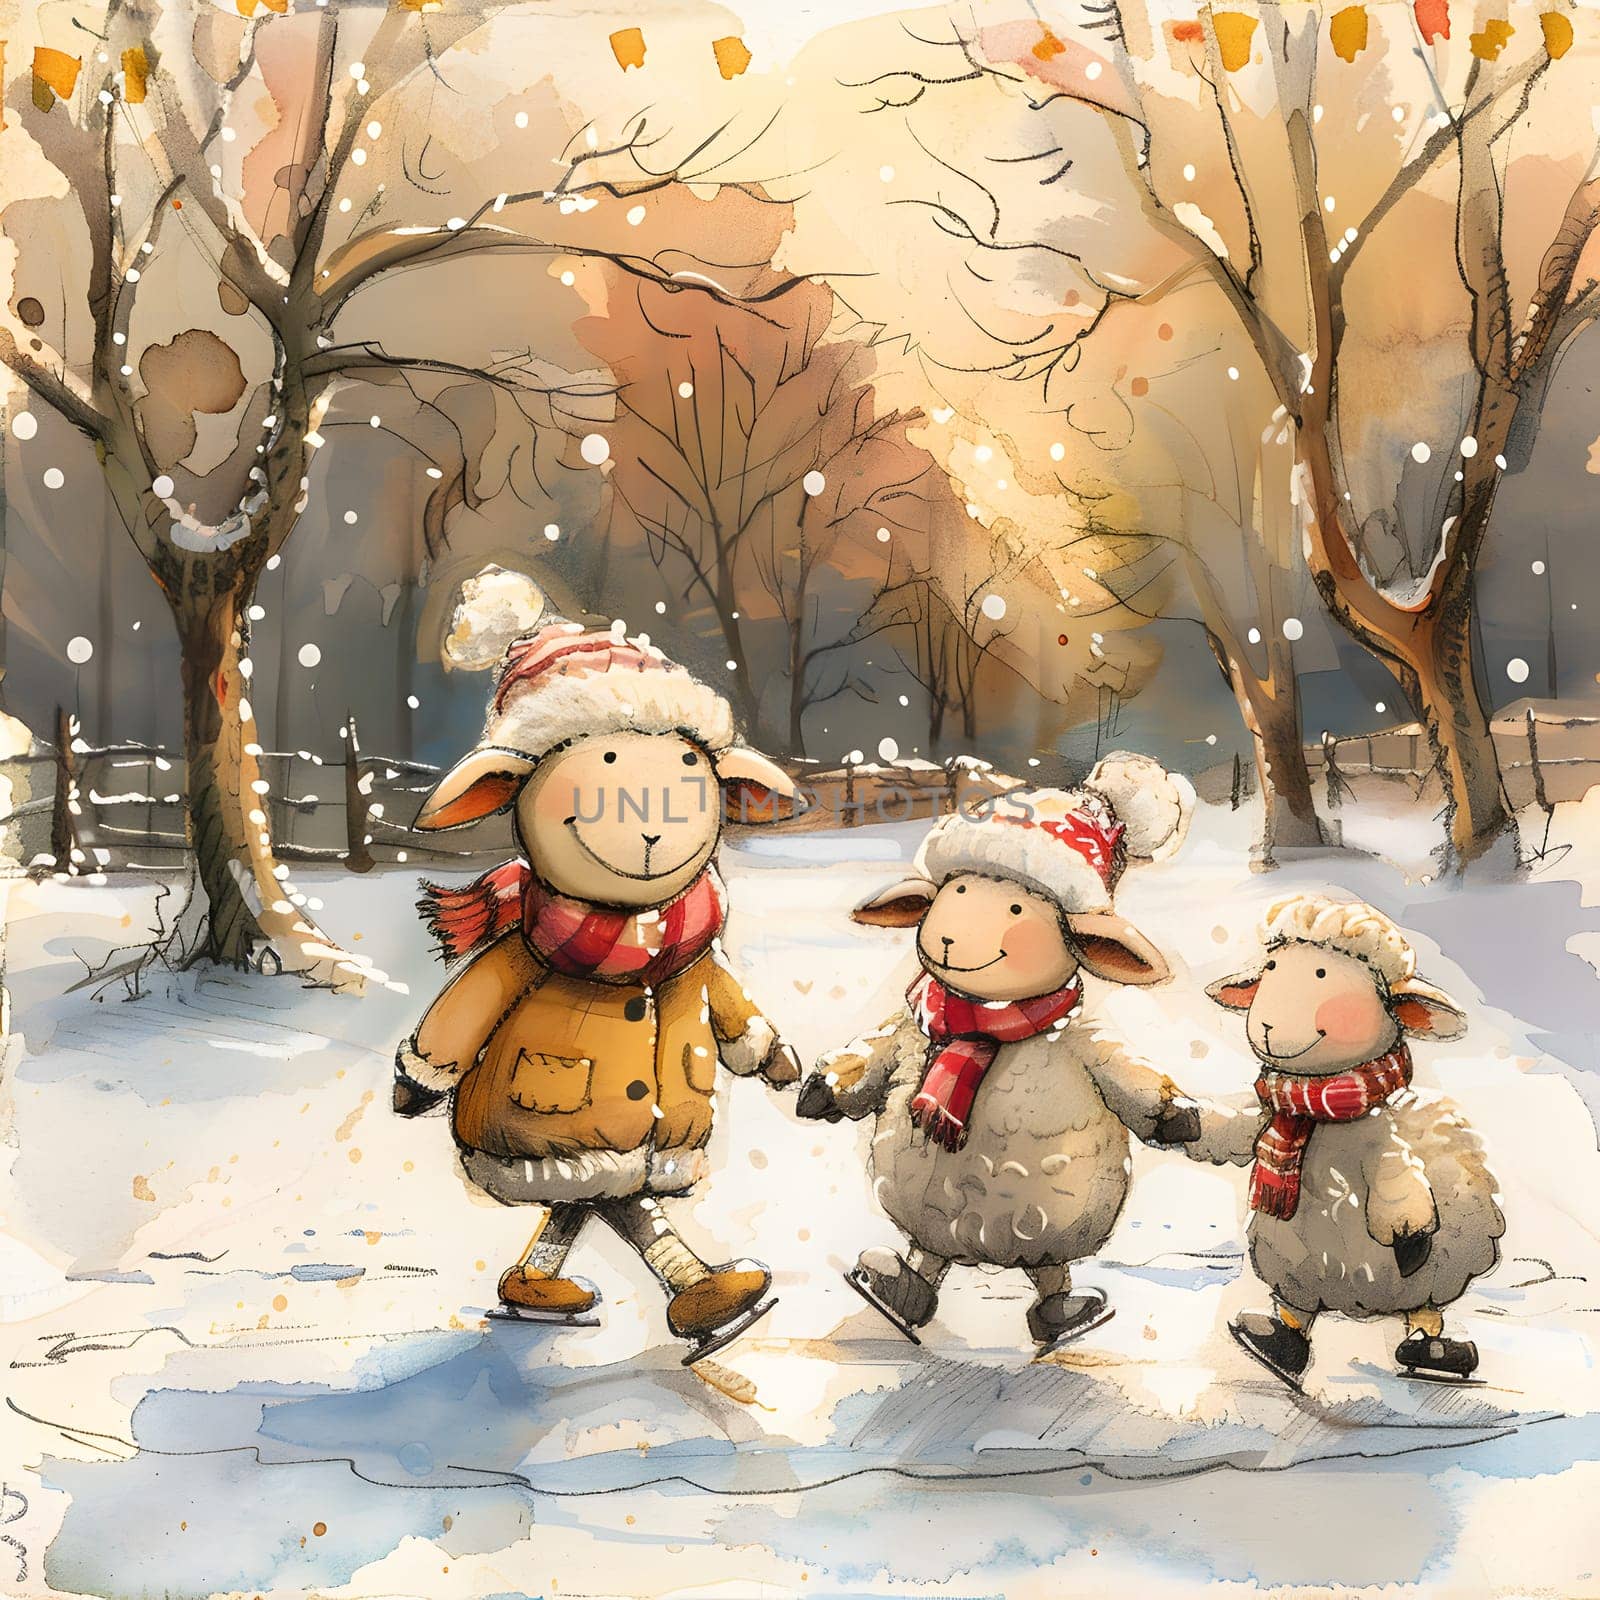 Three sheep are skating hand in hand on the snowy ice, creating a heartwarming winter scene. The snowcovered trees and twigs add to the magical painting of this happy event